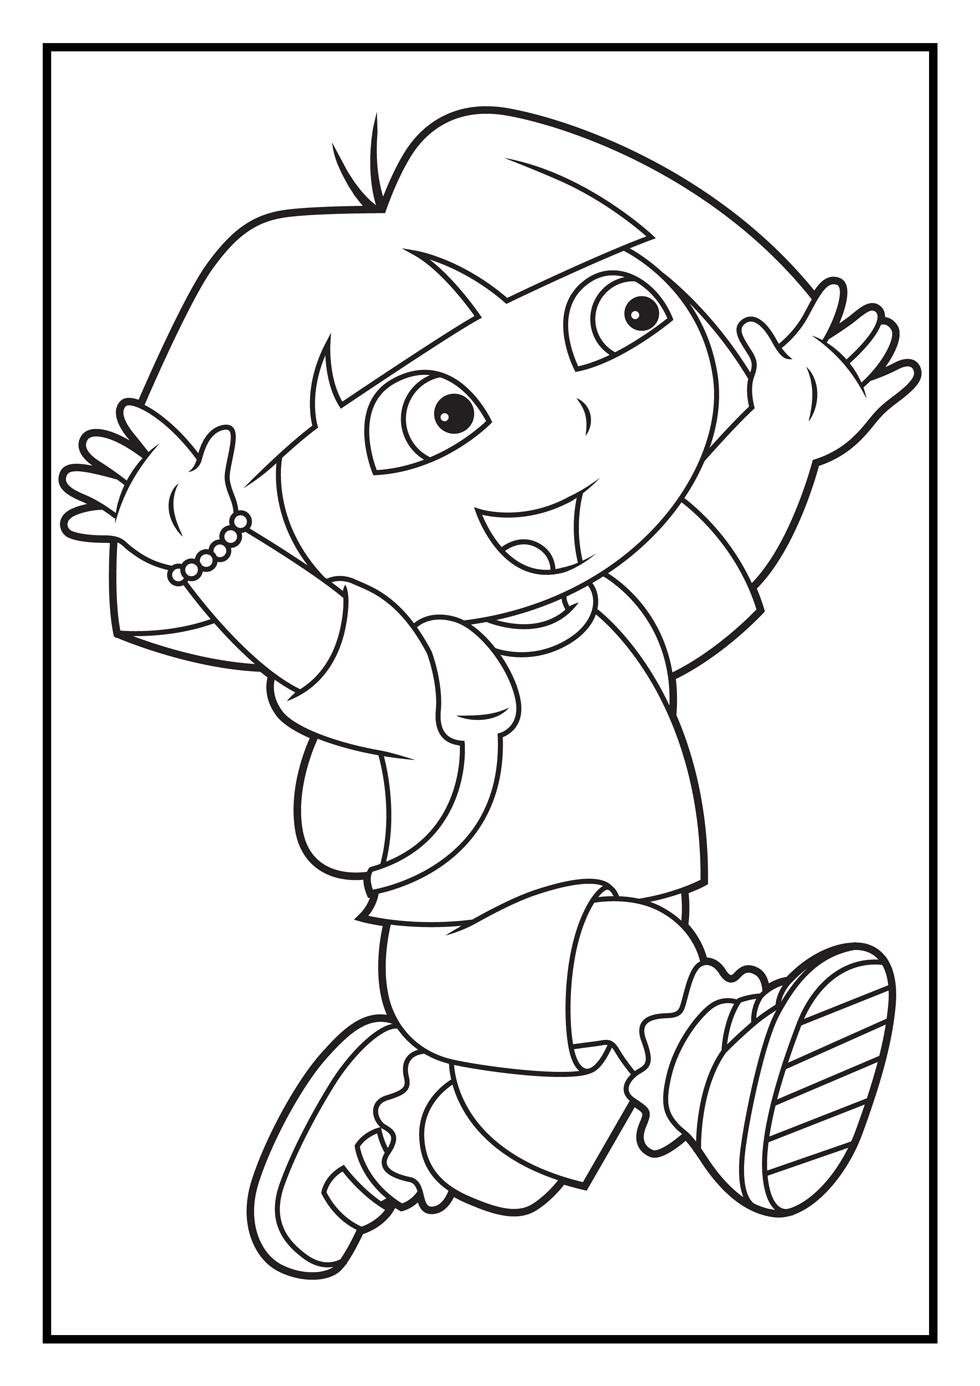 Dora Diego Coloring Pages 5